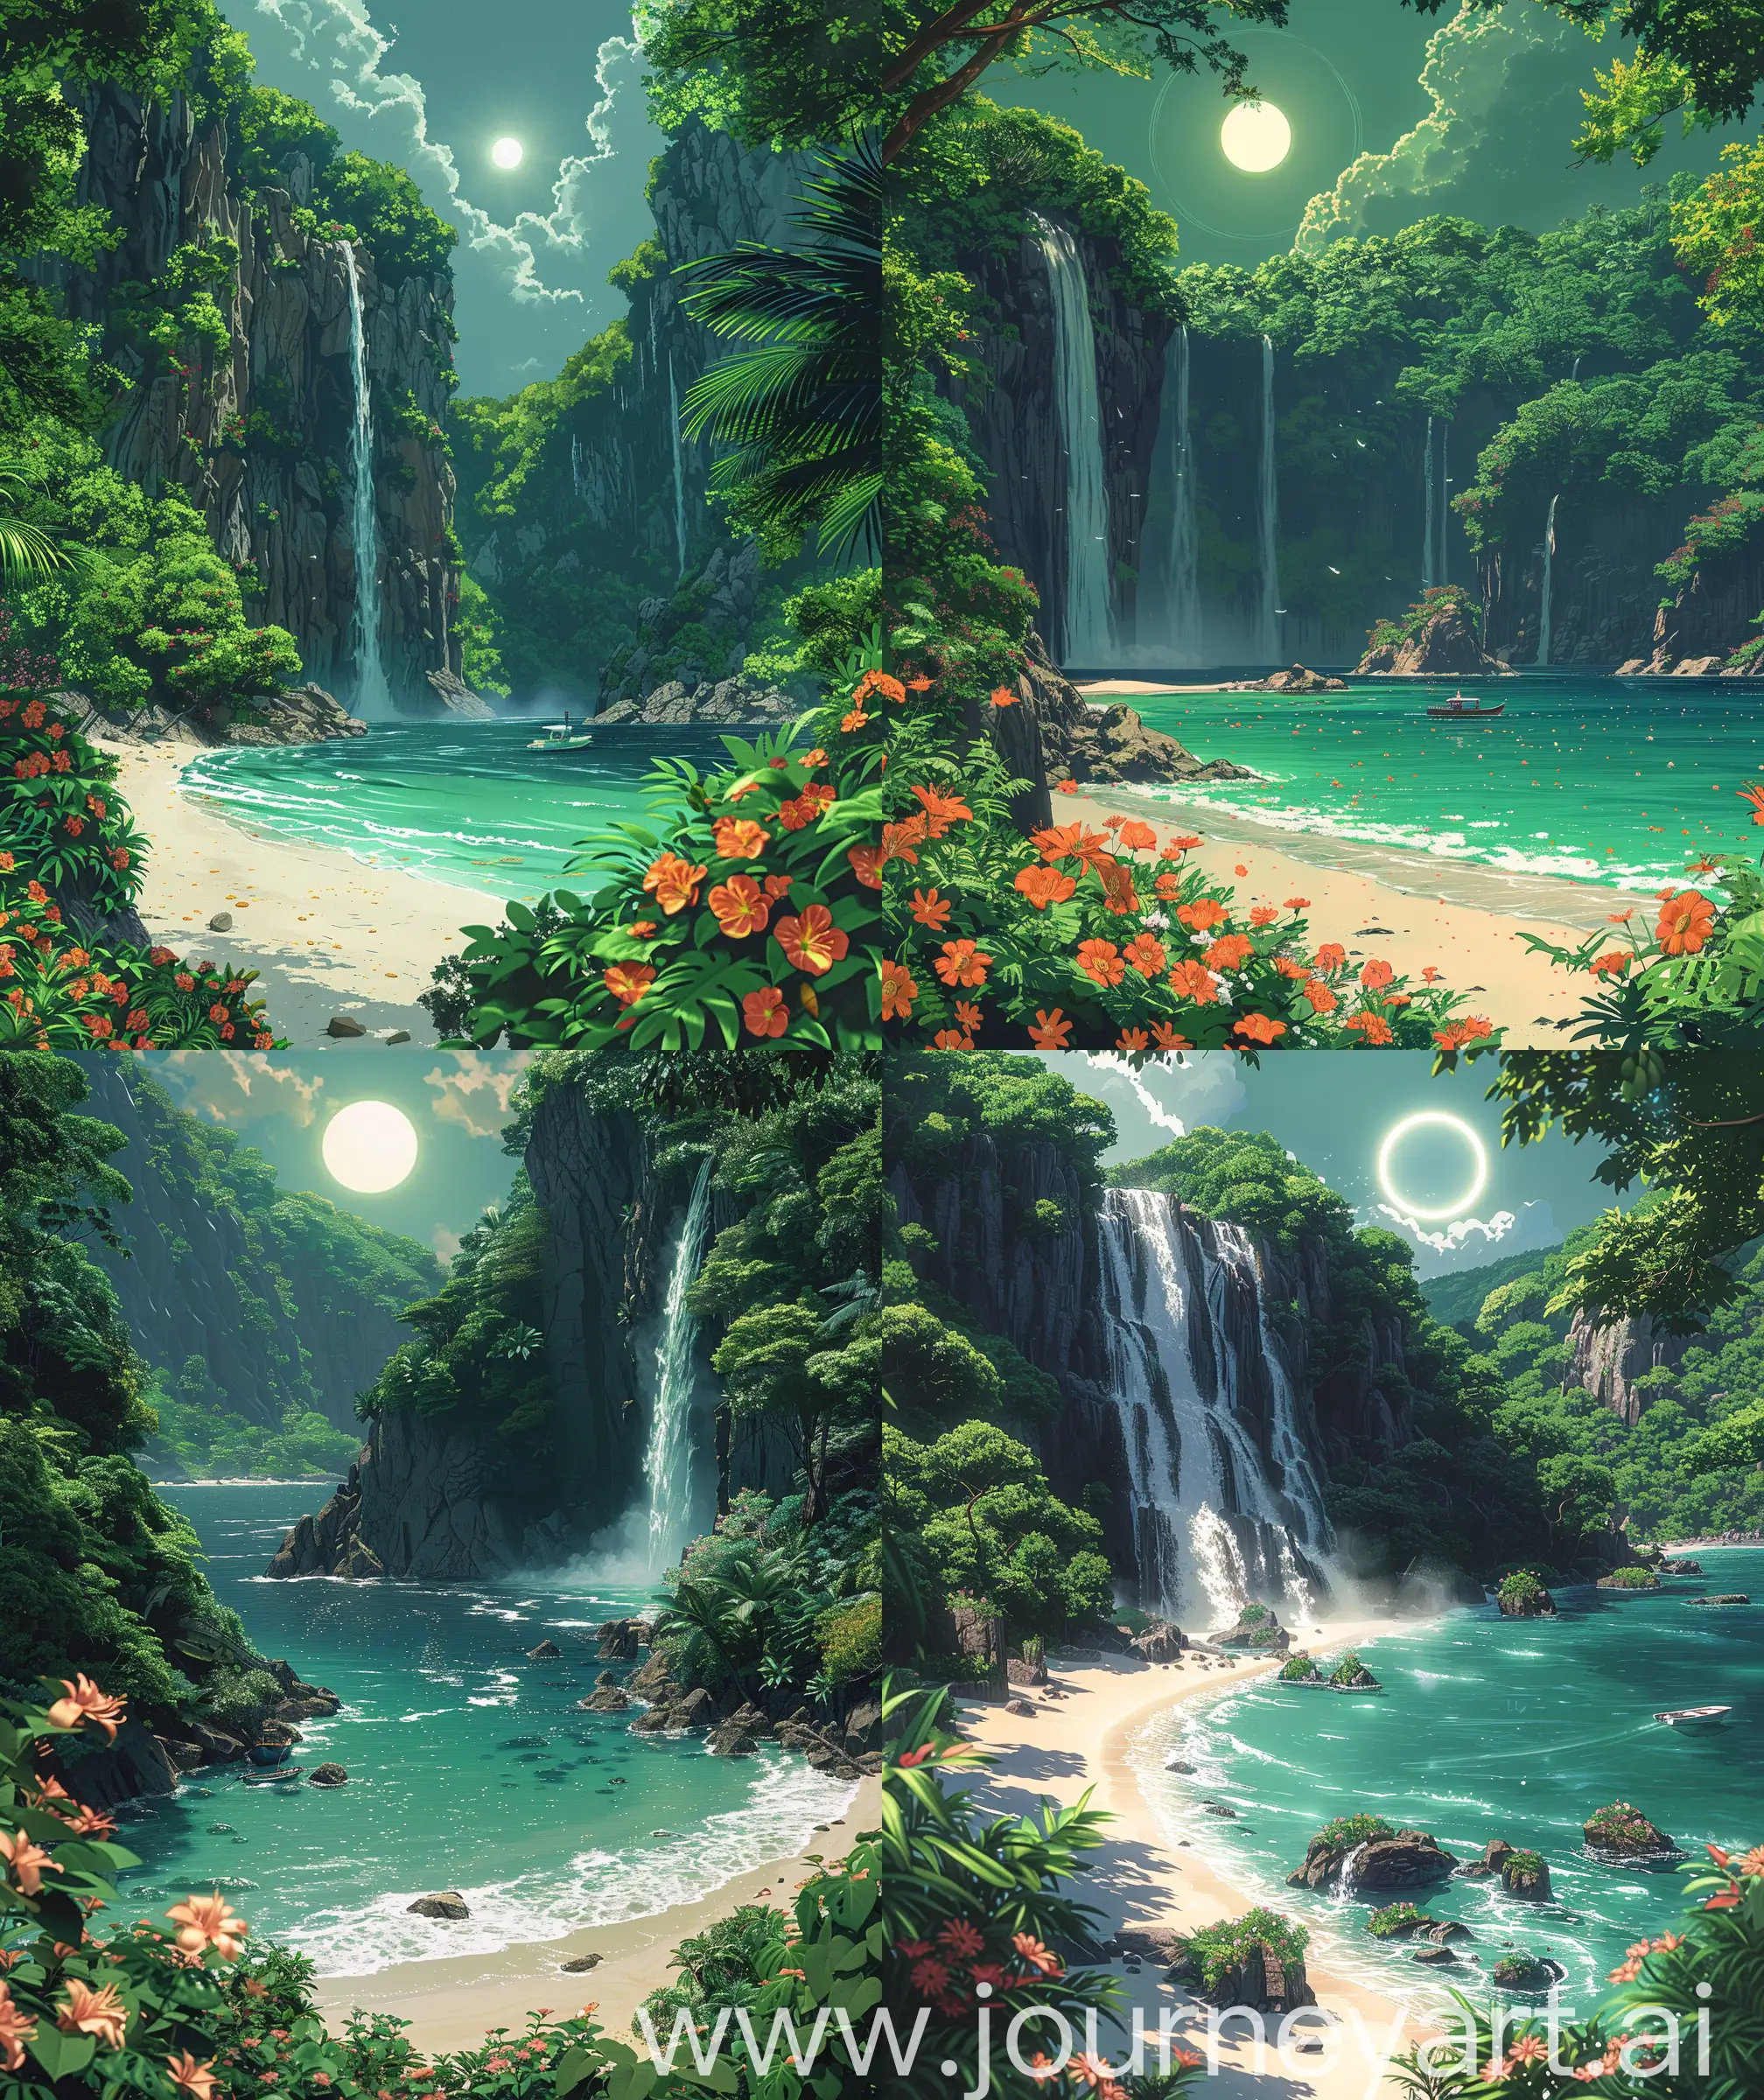 Mokoto-Shinkai-Style-Tranquil-Tropical-Forest-Paradise-with-Waterfall-Ocean-Connection-and-Vibrant-Floral-Beauty